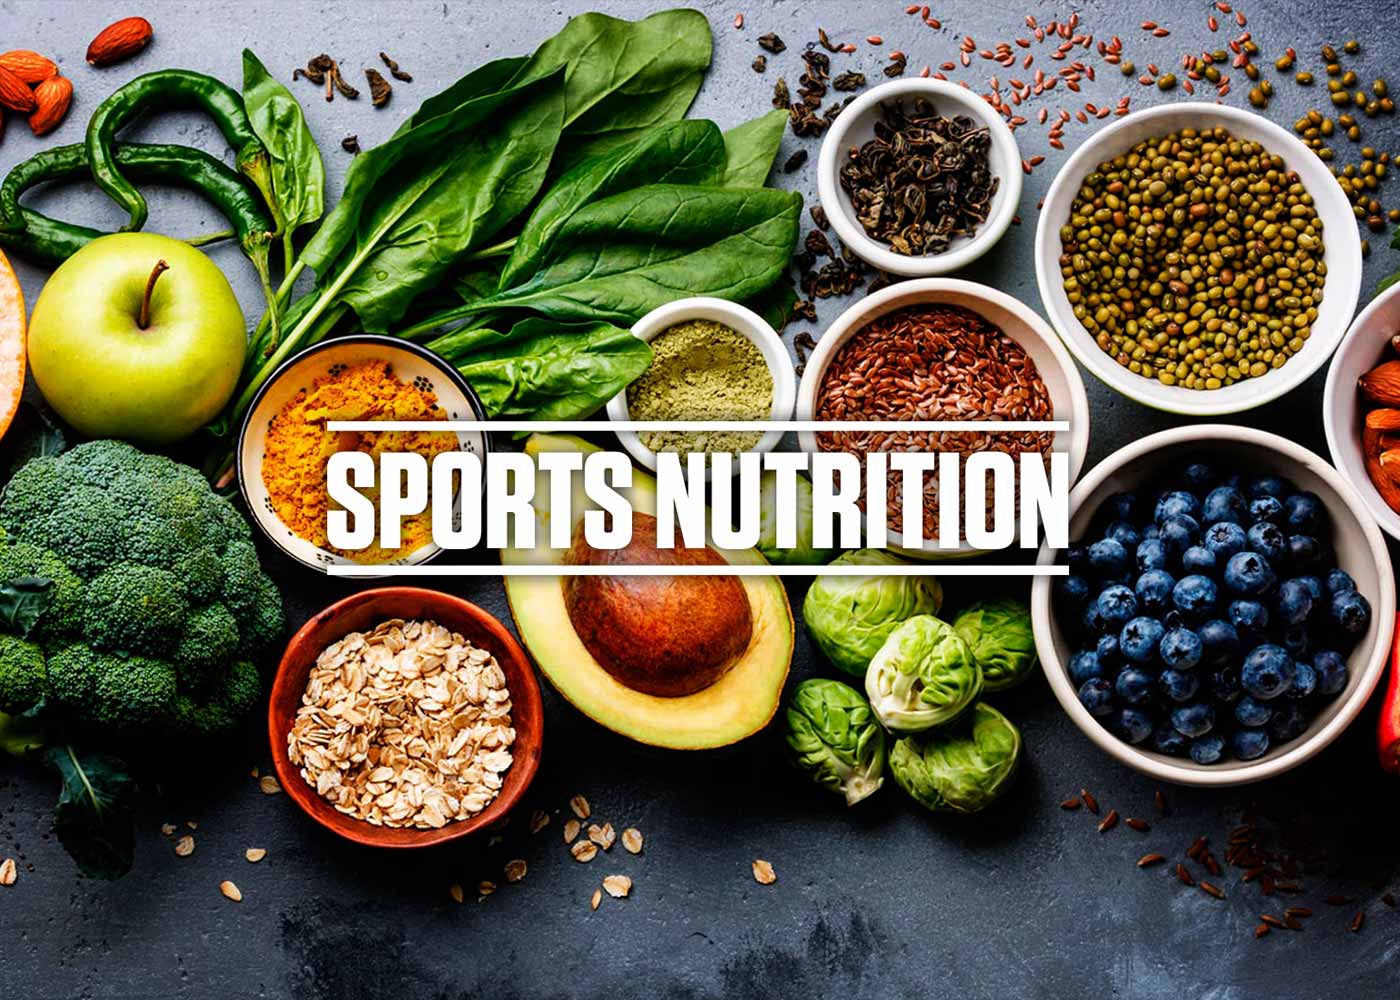 The 8 Best Dietary Programs and Plans for Athletes